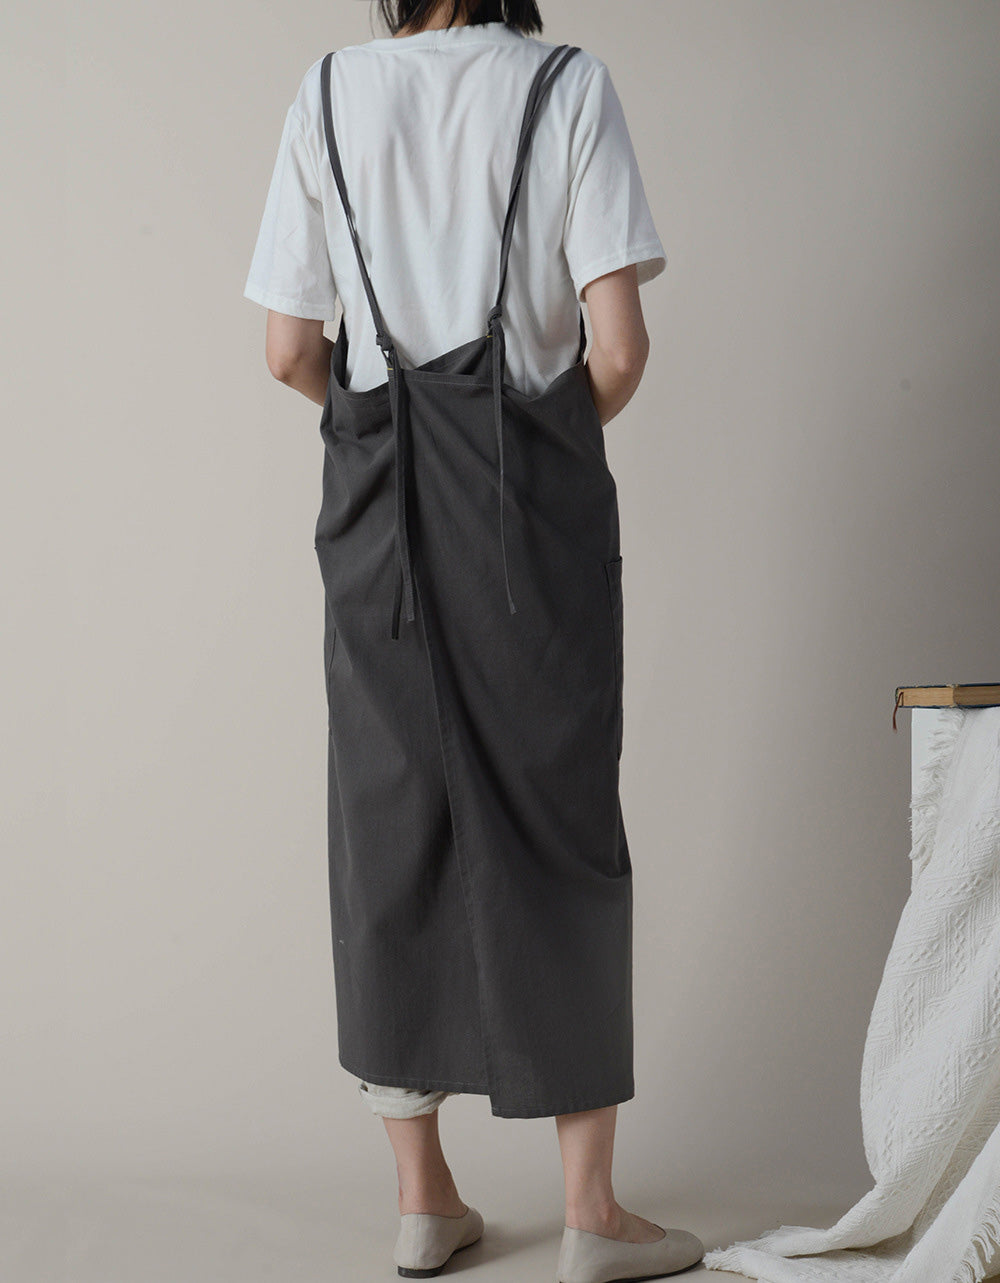 Simple Pure Cotton Waterproof Apron With Pockets